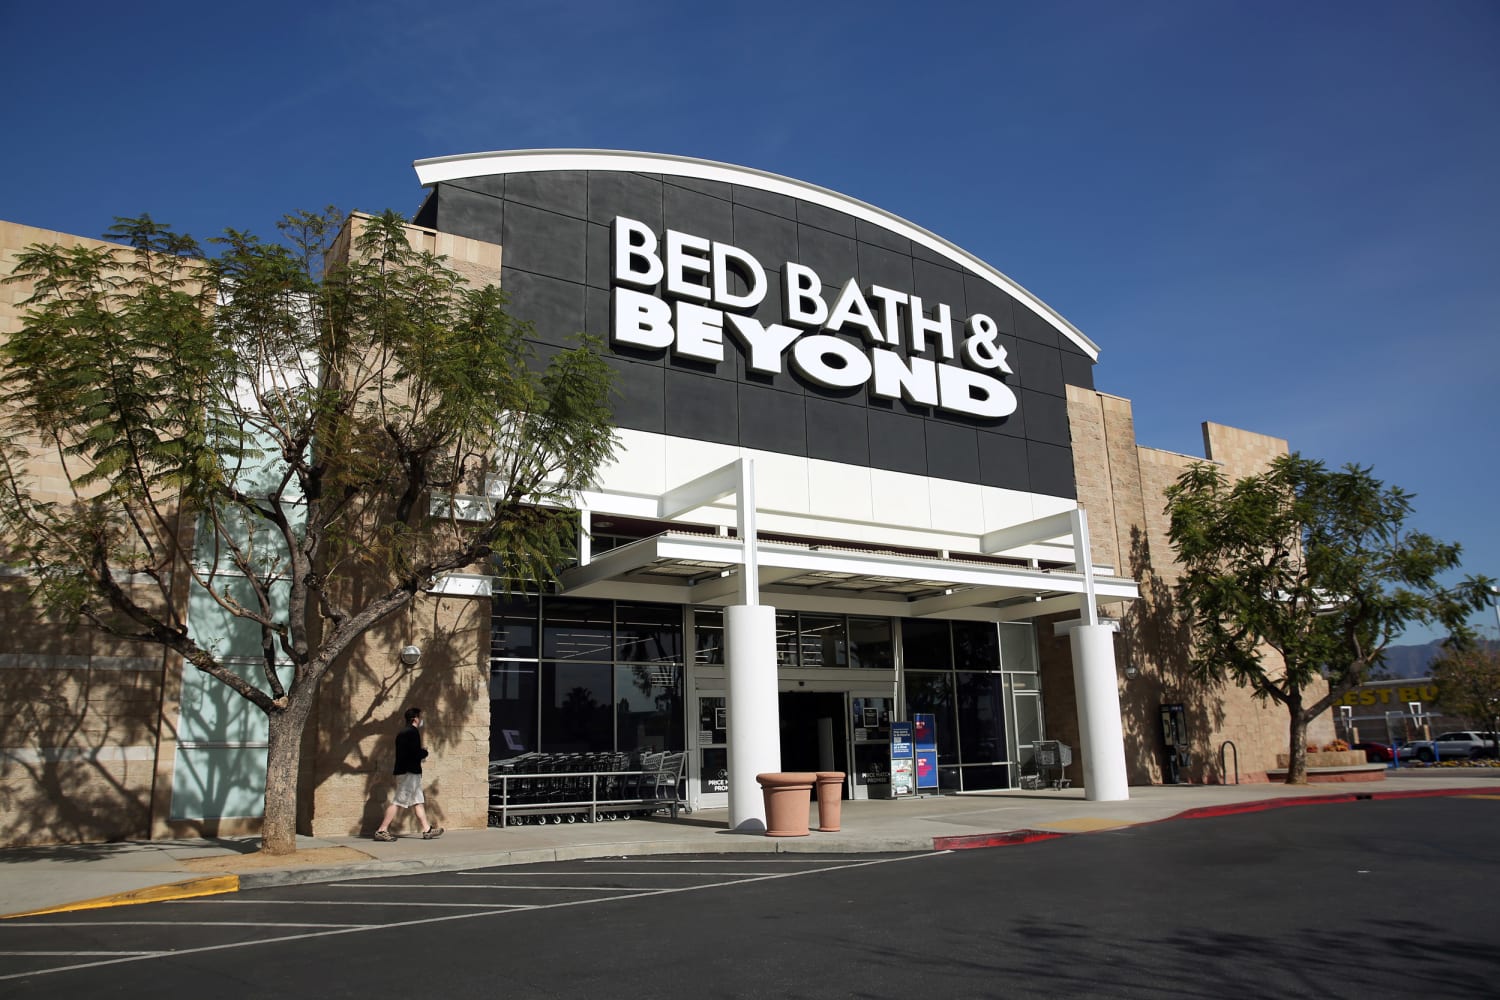 Bed Bath & Beyond: From Popular Home Goods Retailer to Bankruptcy and Liquidation